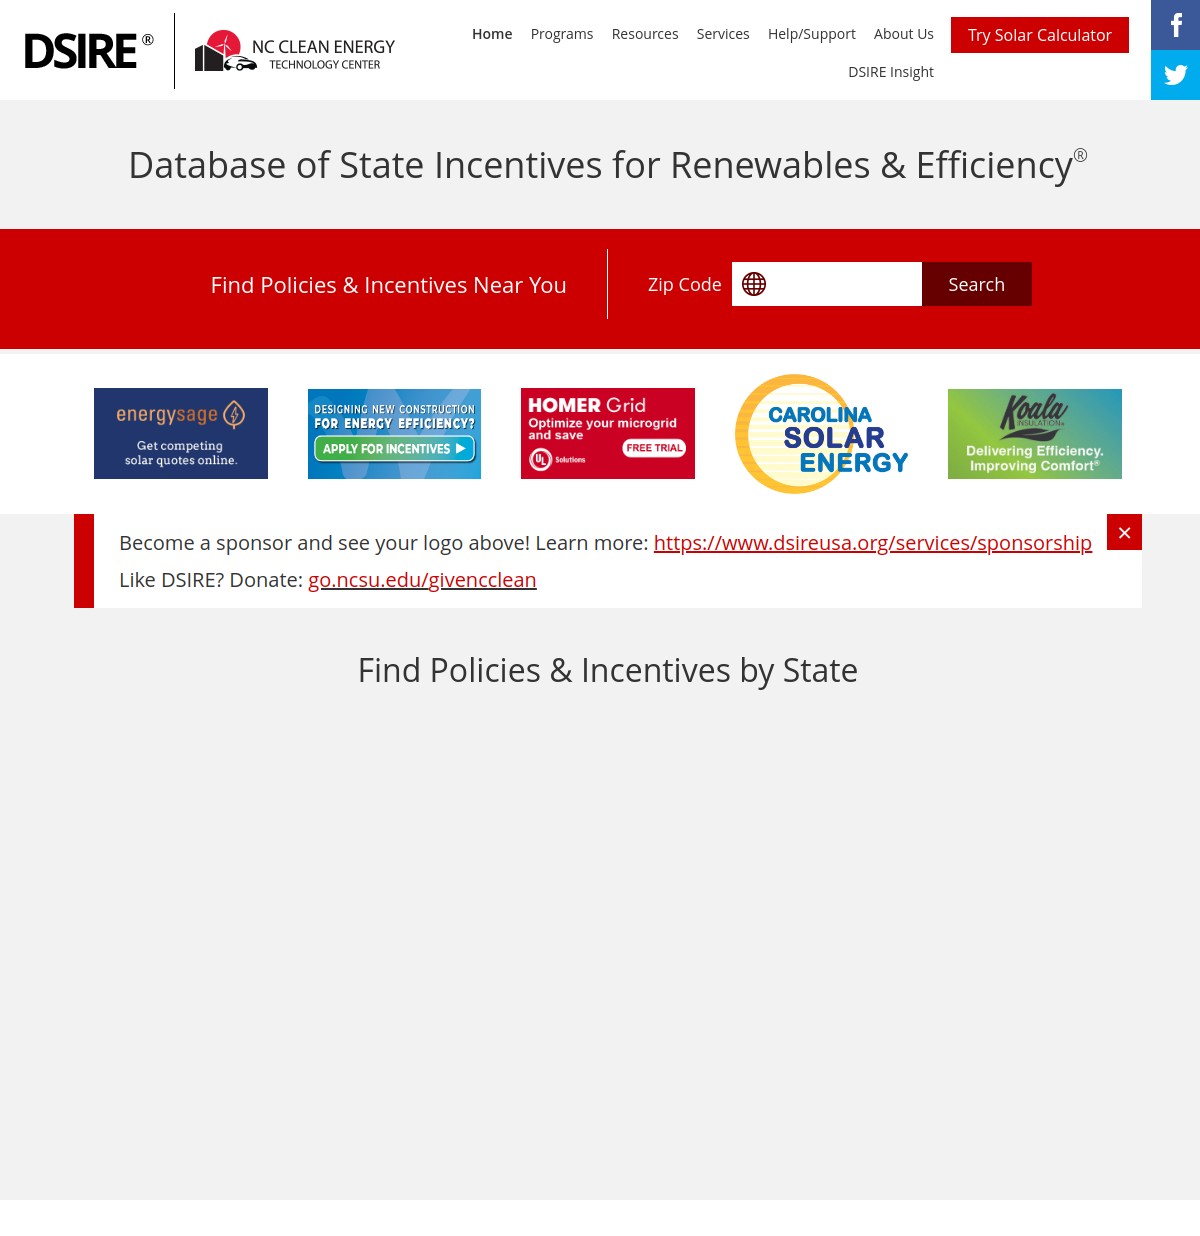 Database of State Incentives for Renewables & Efficiency